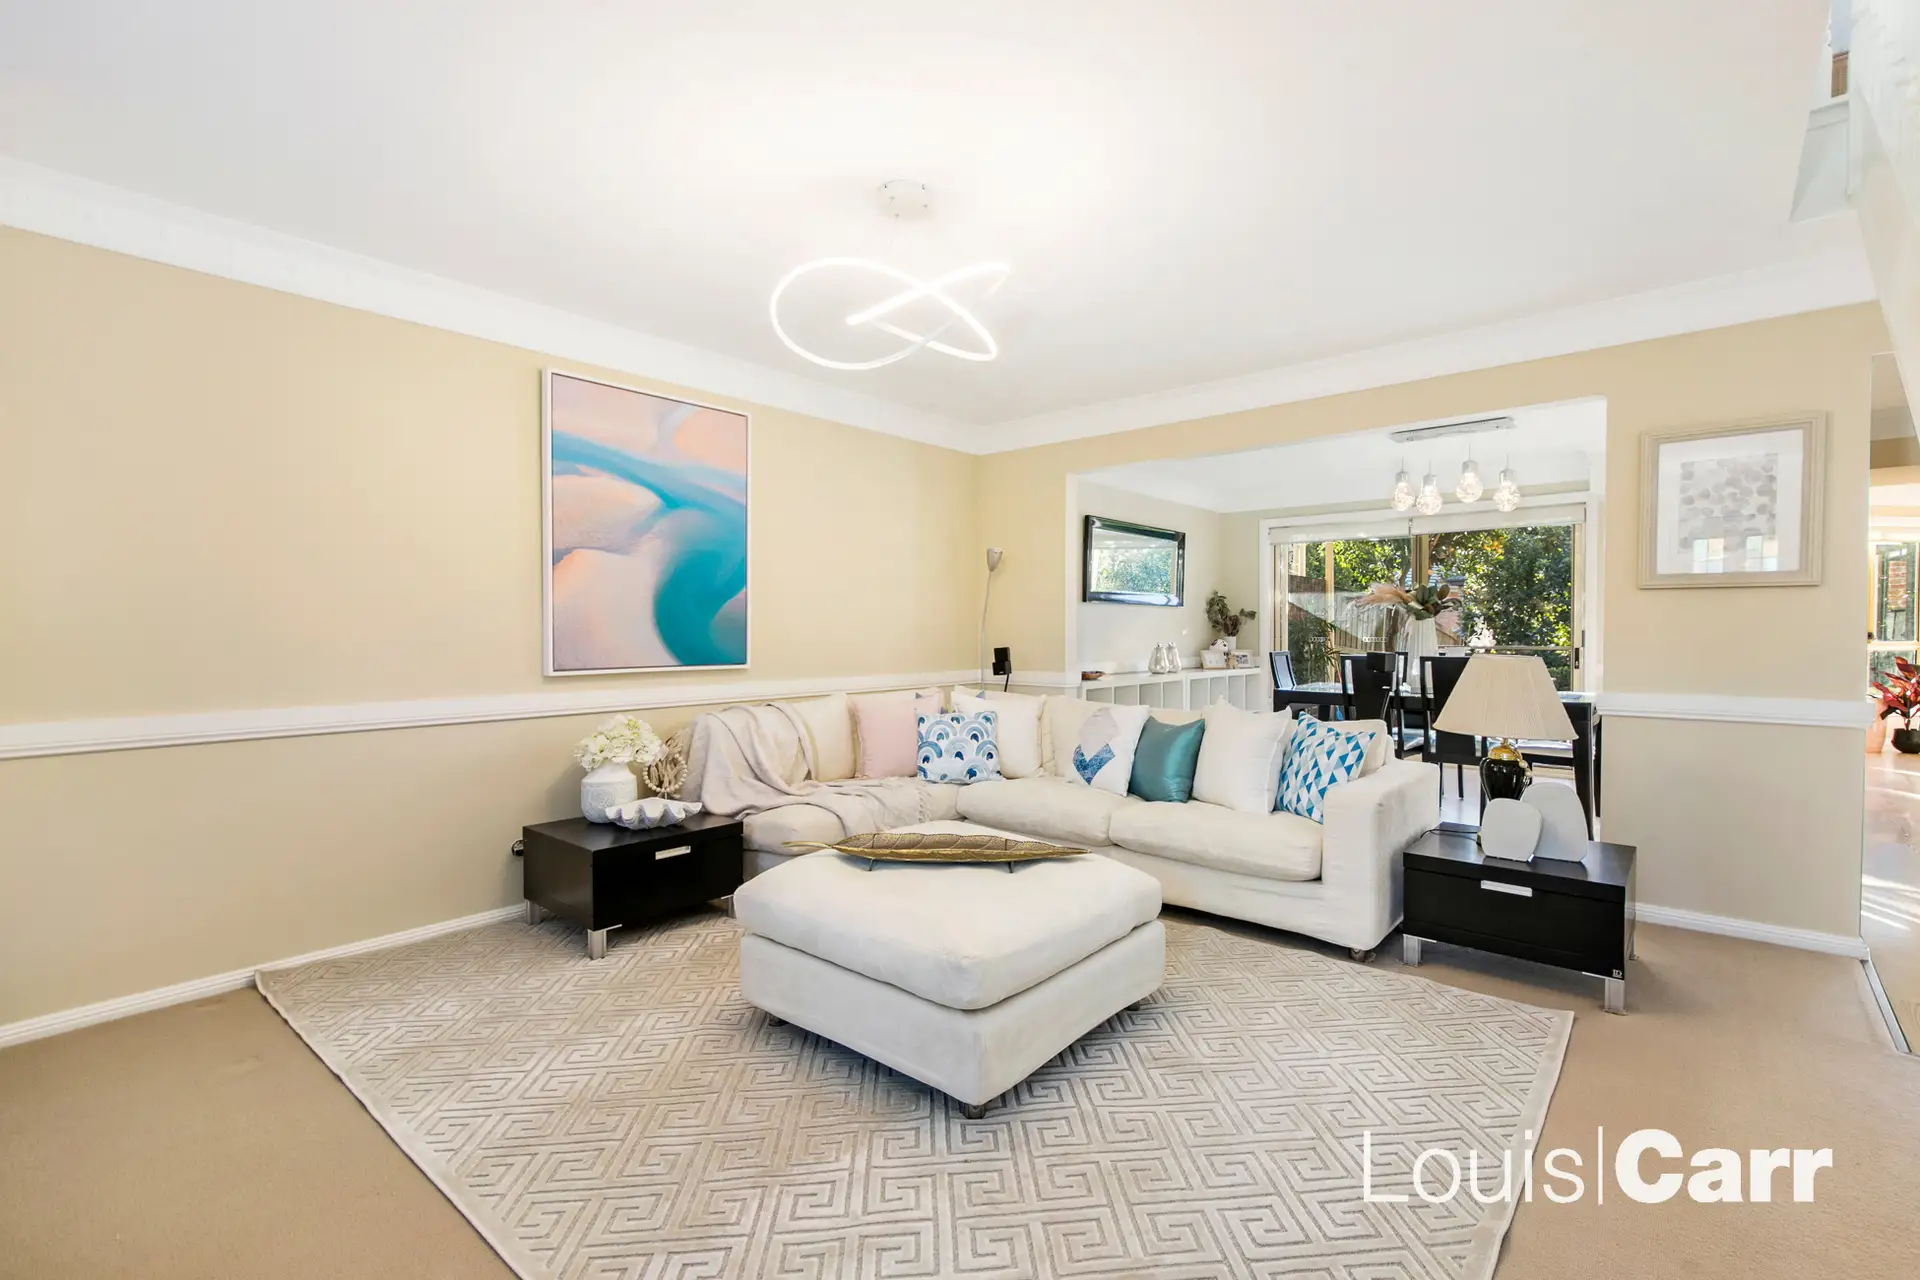 Photo #6: 16B Darlington Drive, Cherrybrook - Sold by Louis Carr Real Estate